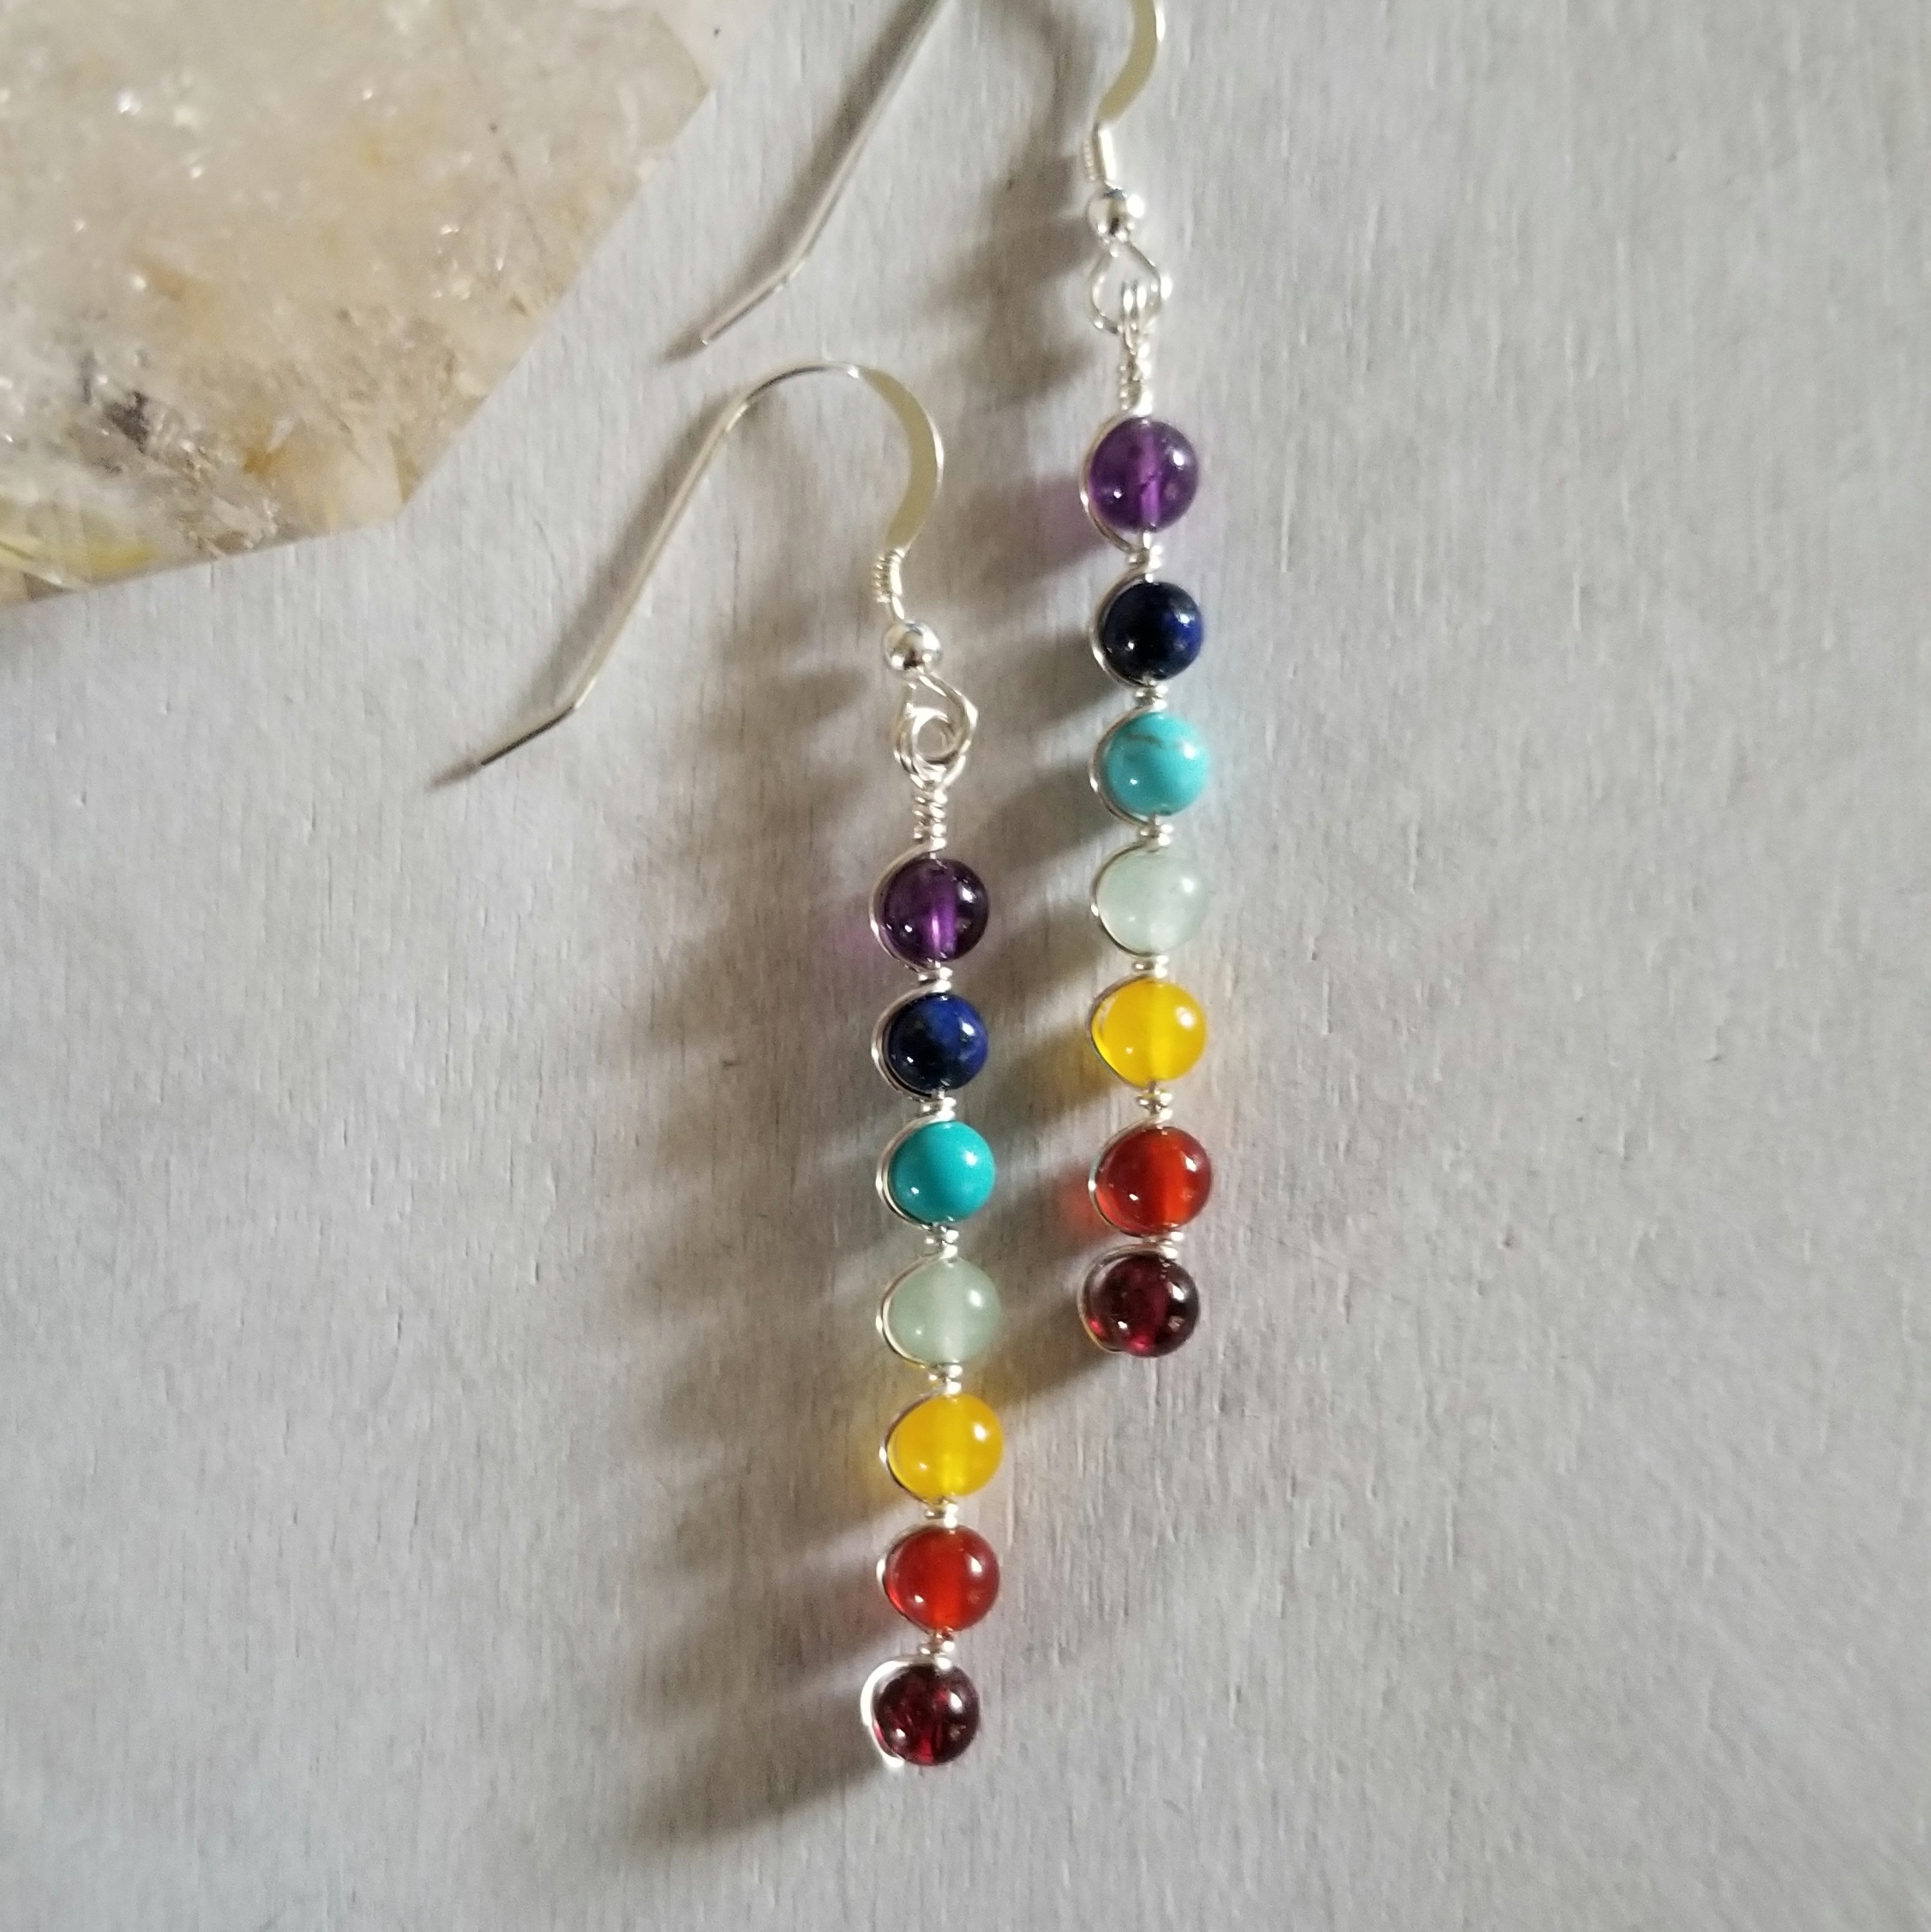 Chakra Sun Earrings - Kit or Finished Jewelry – The Bead Shop